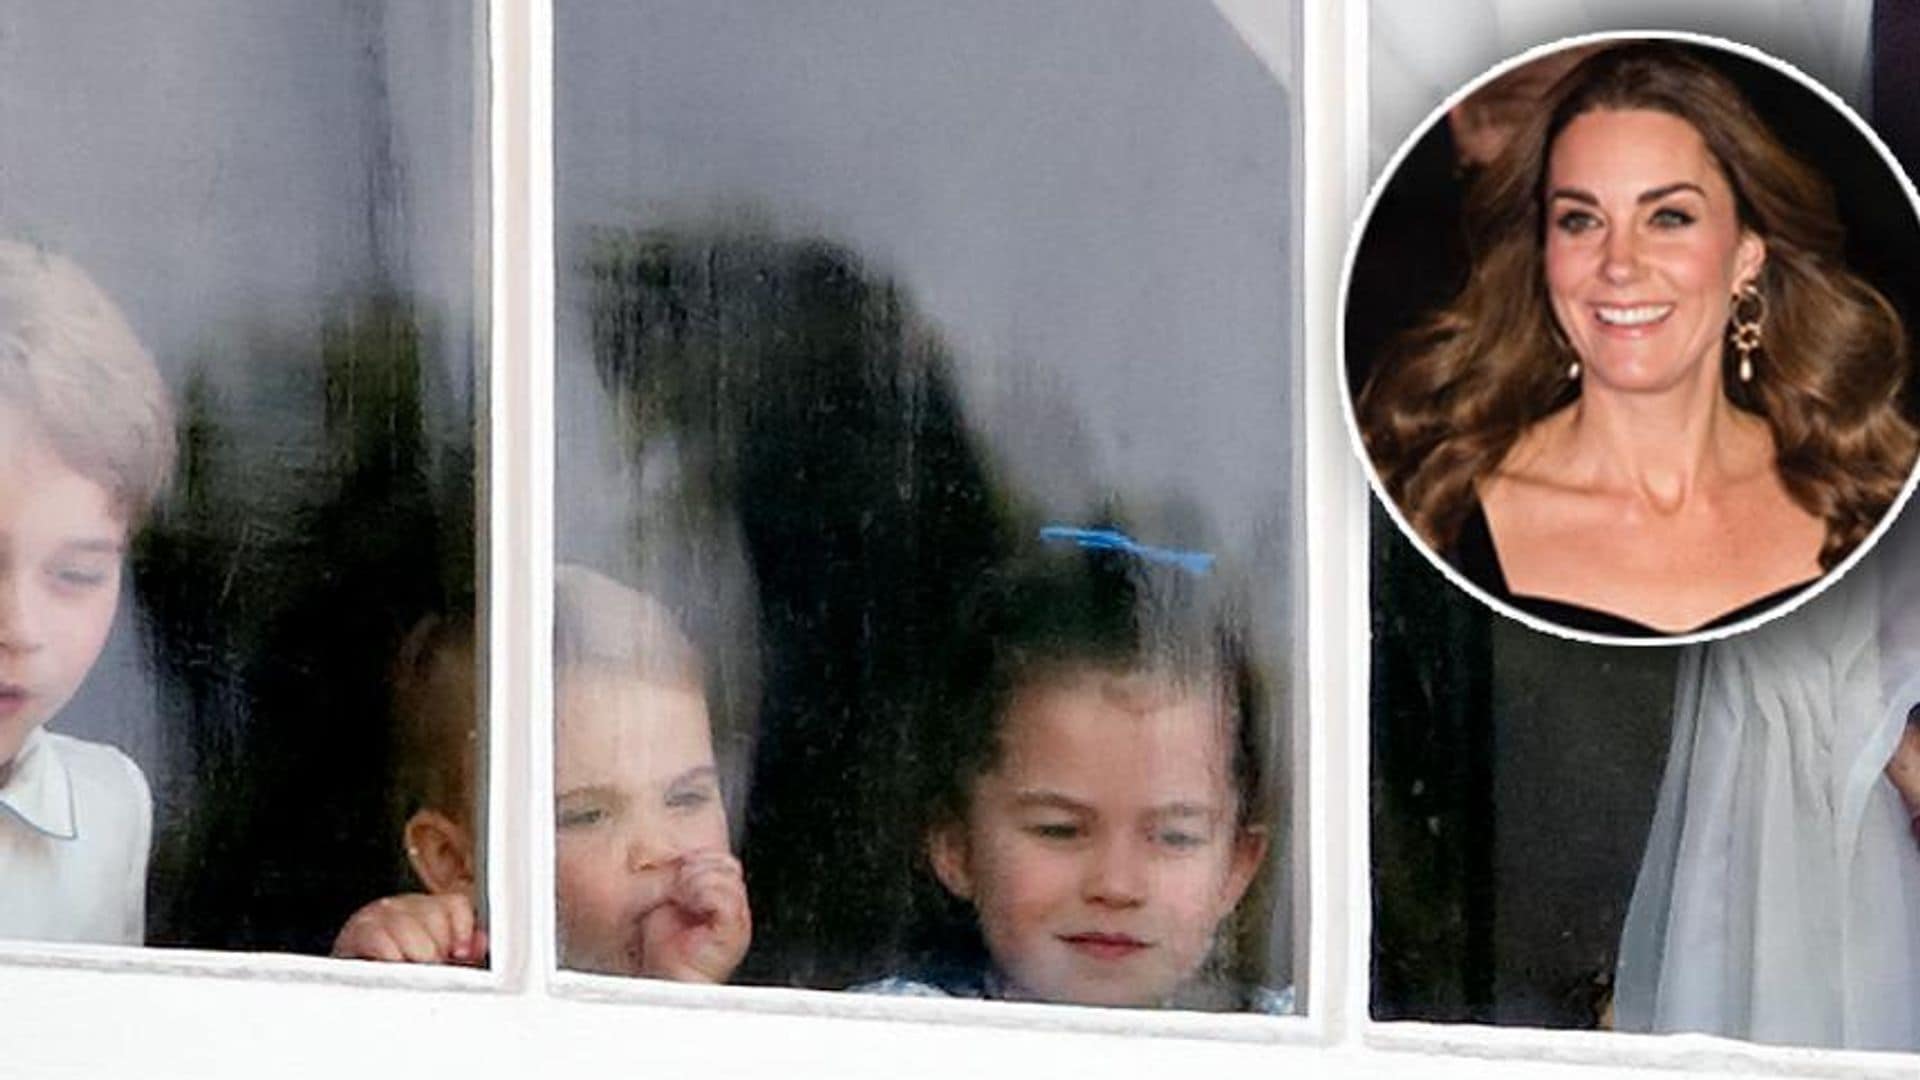 Prince George, Princess Charlotte and Prince Louis wanted to join their mom and dad